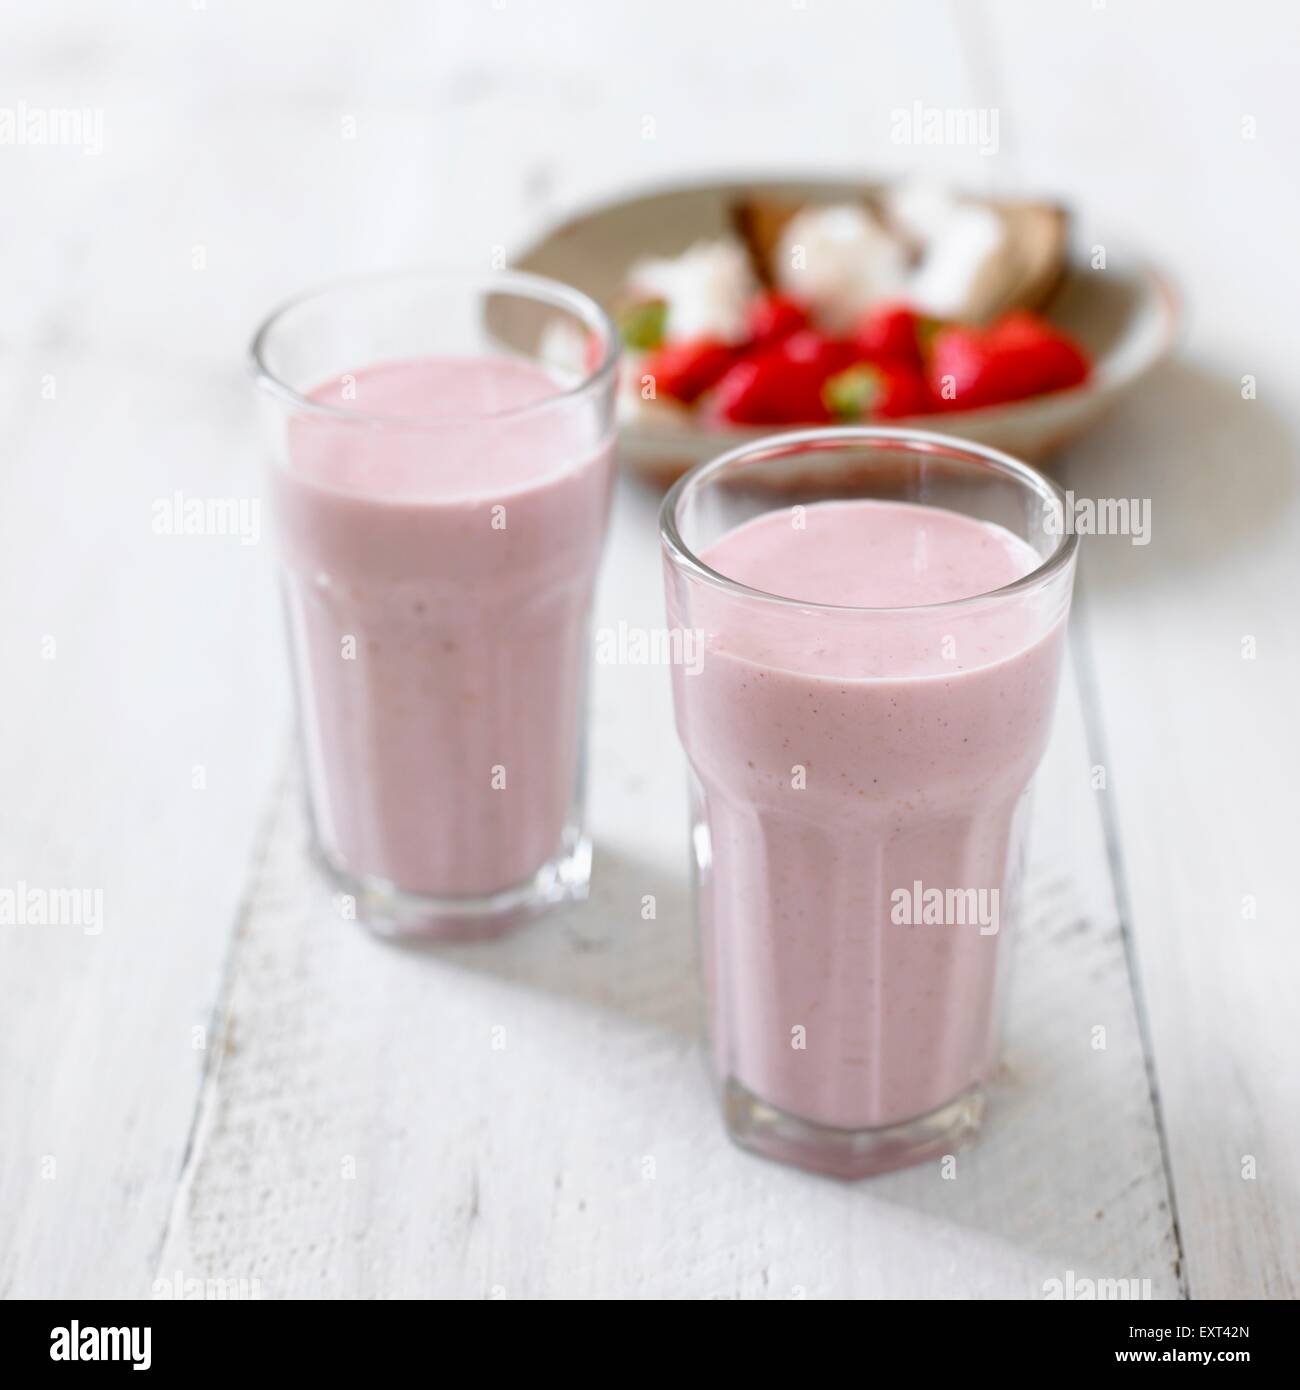 Two glasses of strawberry and macadamia smoothies, ingredients in the background Stock Photo